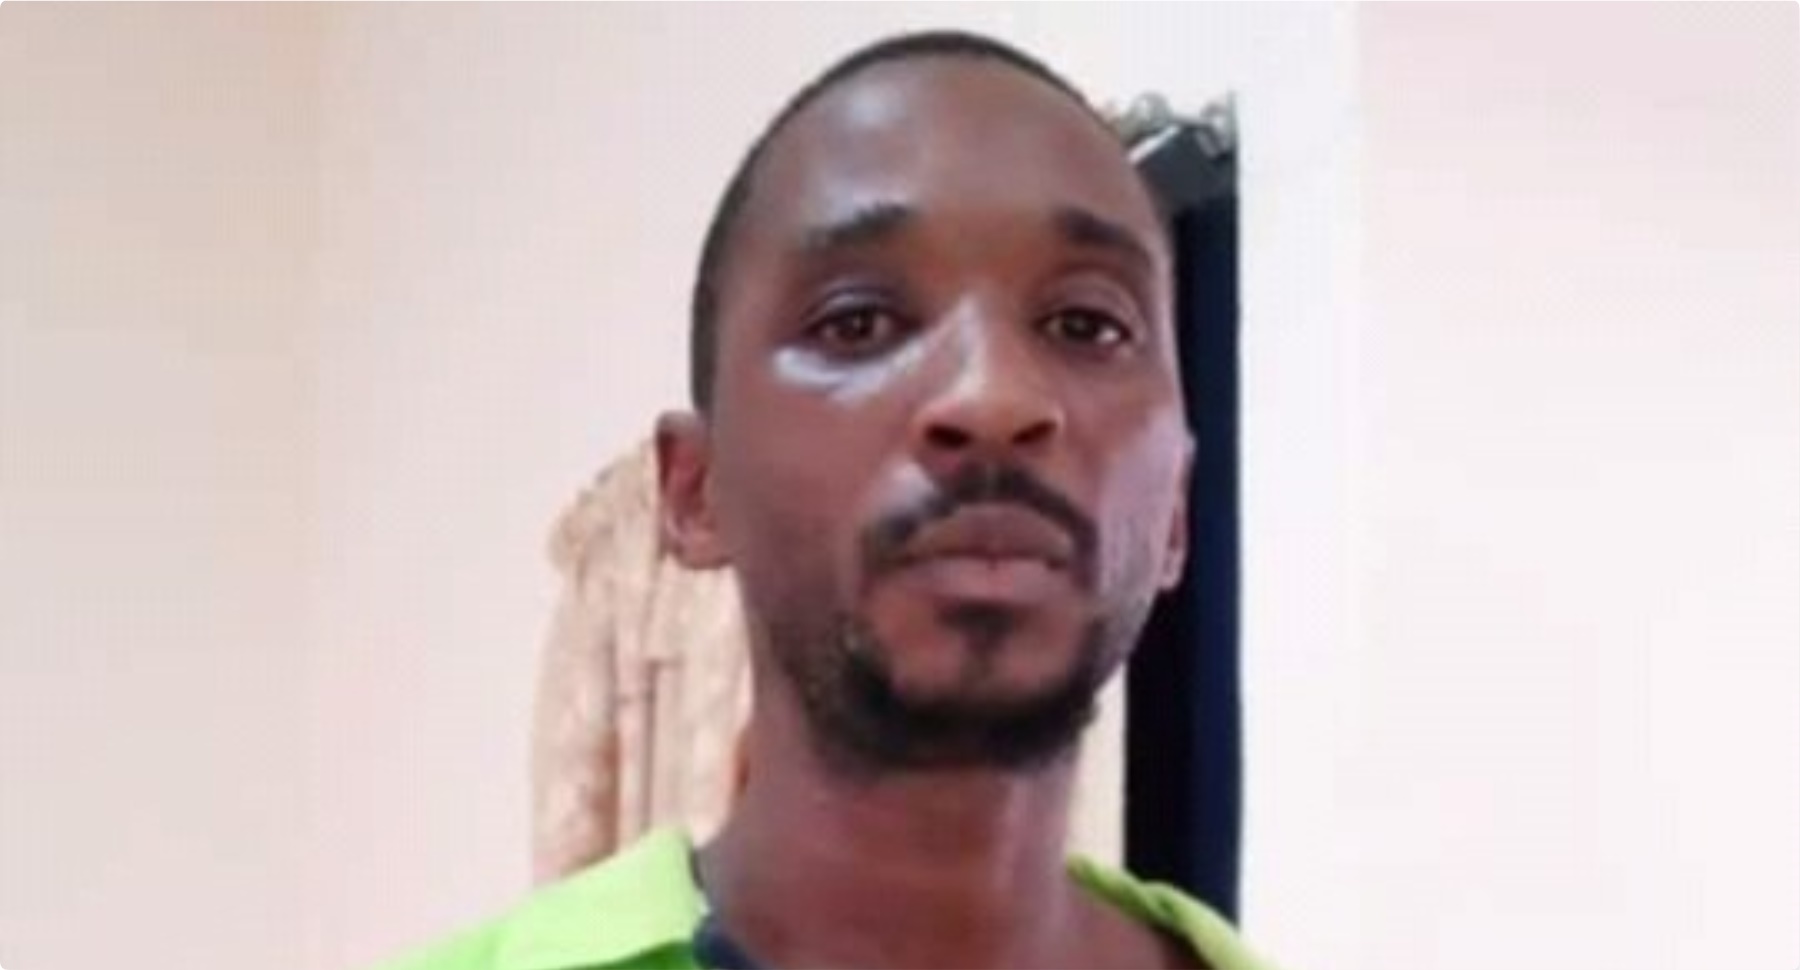 Nigerian kidnapper charged for cell break but victims remain missing